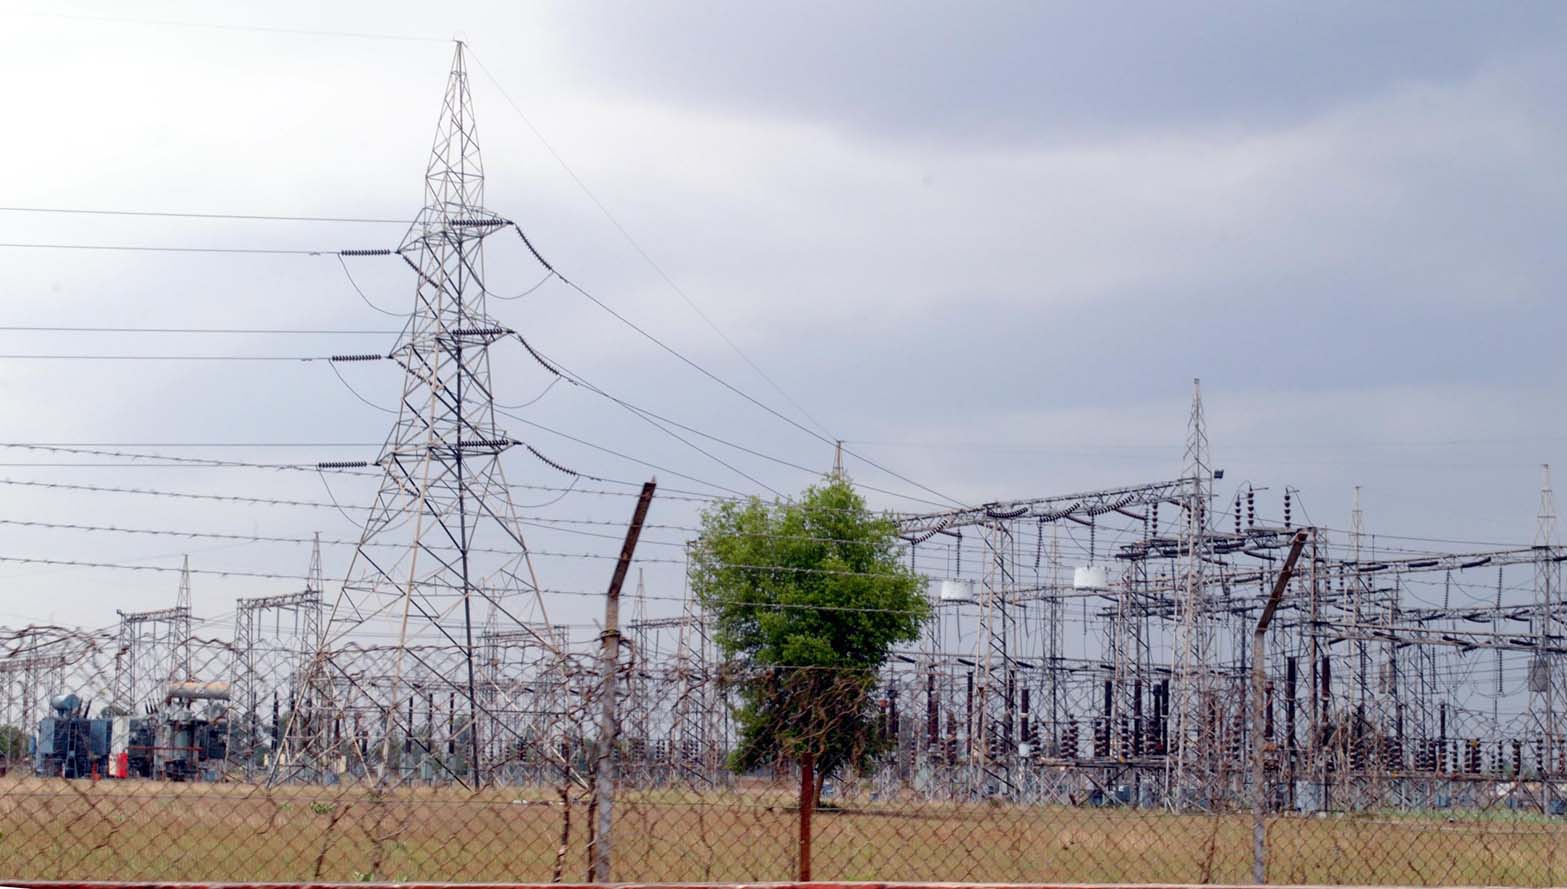 Post Haryana Electricity Regulatory Commission order, vendors say no to sell power: Purchase panel